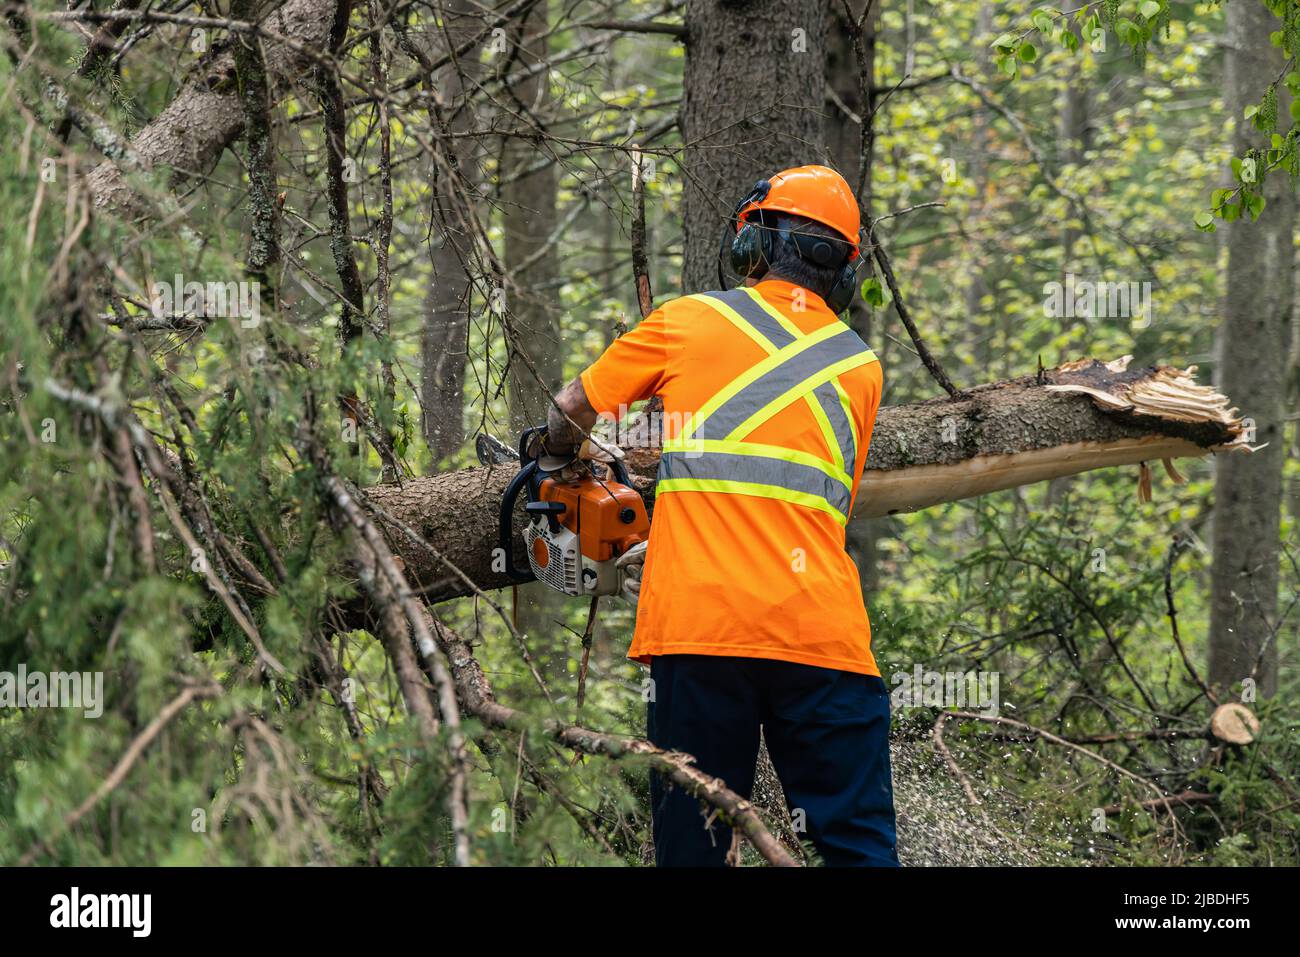 A tree surgeon is seen from behind wearing high visibility clothes, using chainsaw to clear severed trees after gale force winds. Copy space to side. Stock Photo